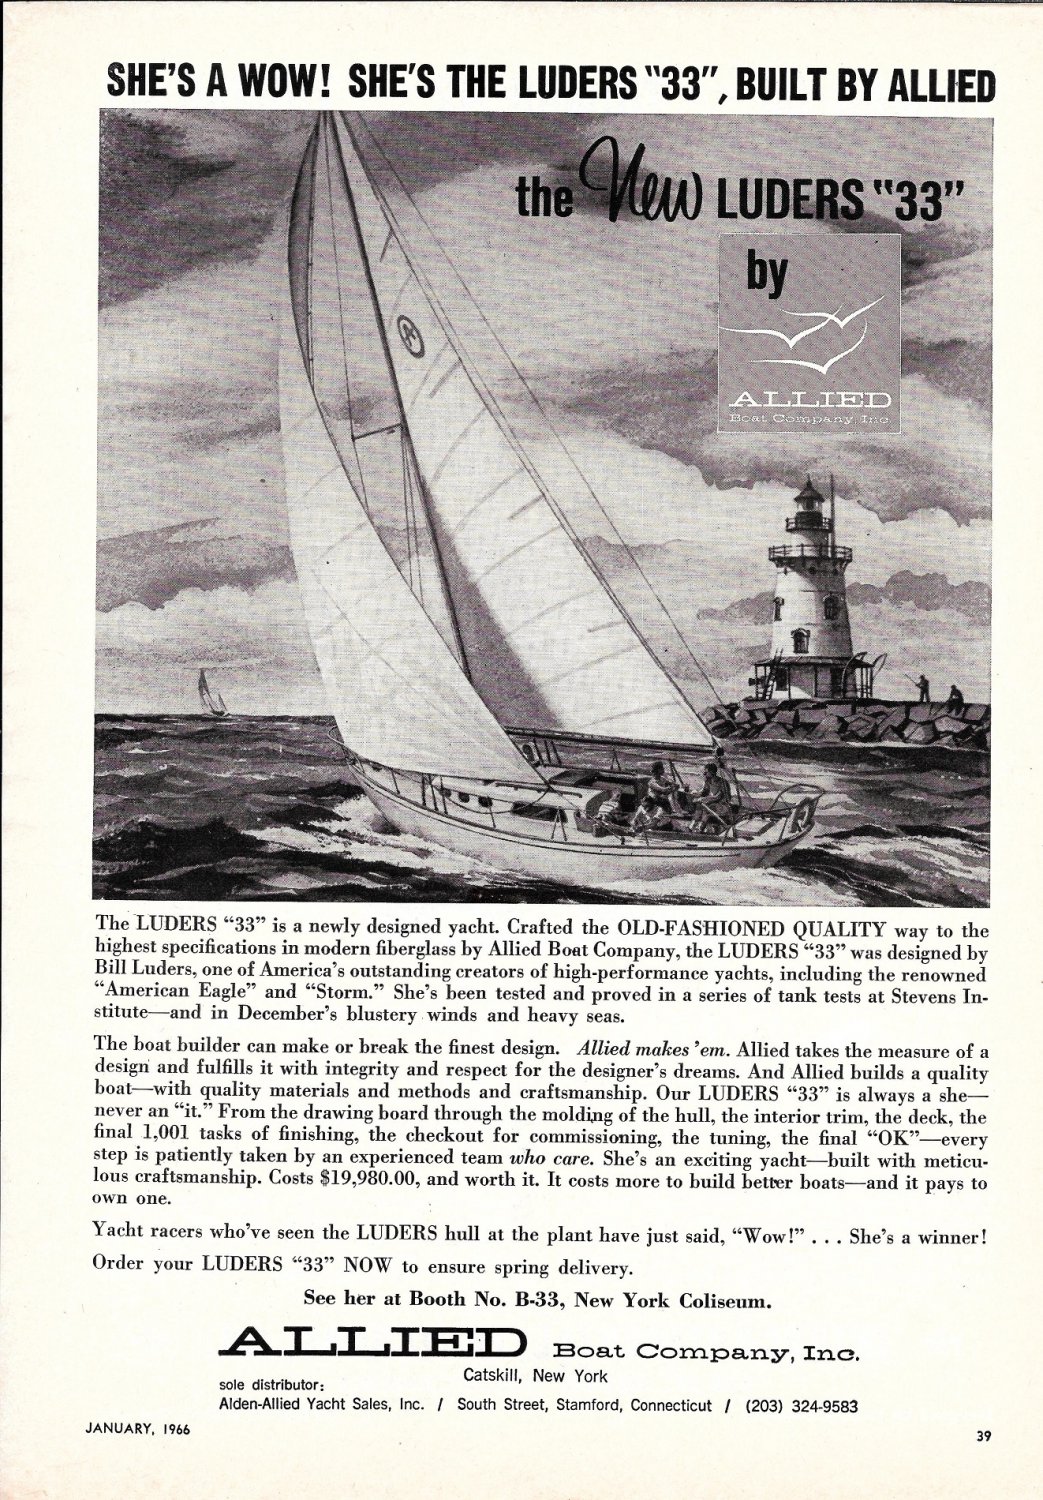 1966 Allied Boat Co 2 Page Ad- Drawing & Photo Luders 33 & seabreeze 35